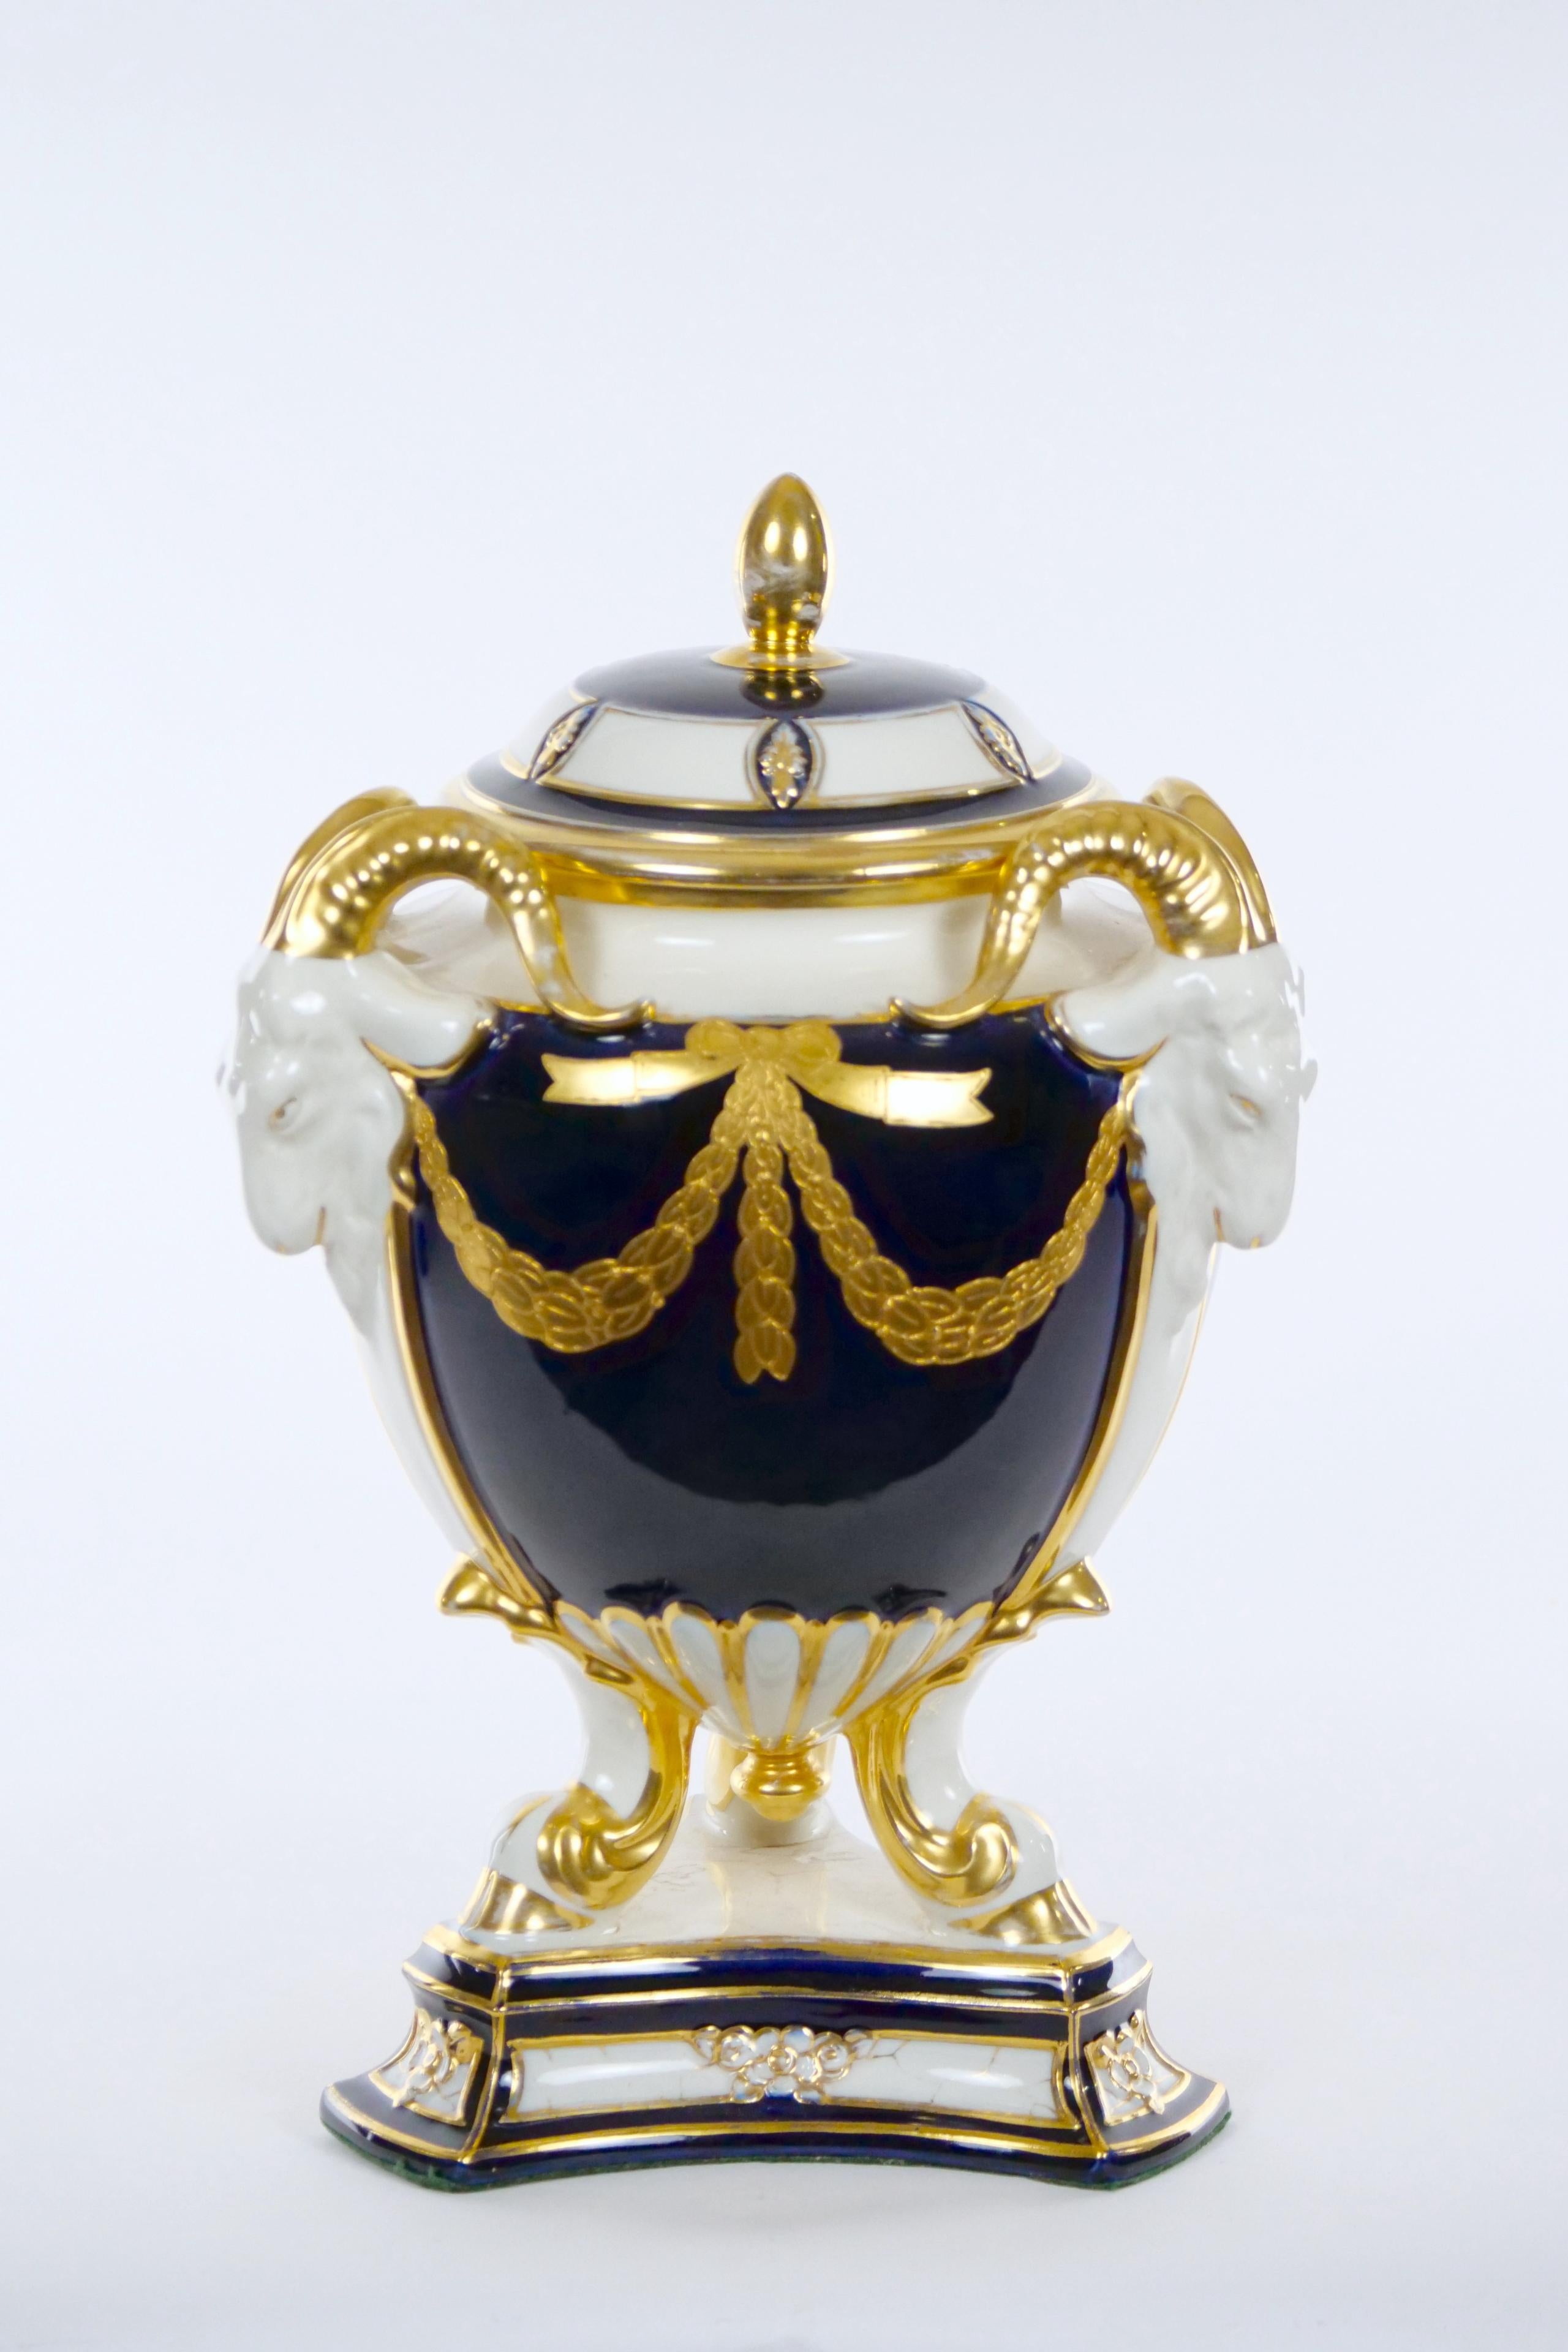 Stunning glazed porcelain / hand painted and gilt decorated covered urns with figural Ram’s head handles. The urn features a deep glazed navy blue with an egg shell background decorated with gilt gold resting on a geometric shape form base. The urn